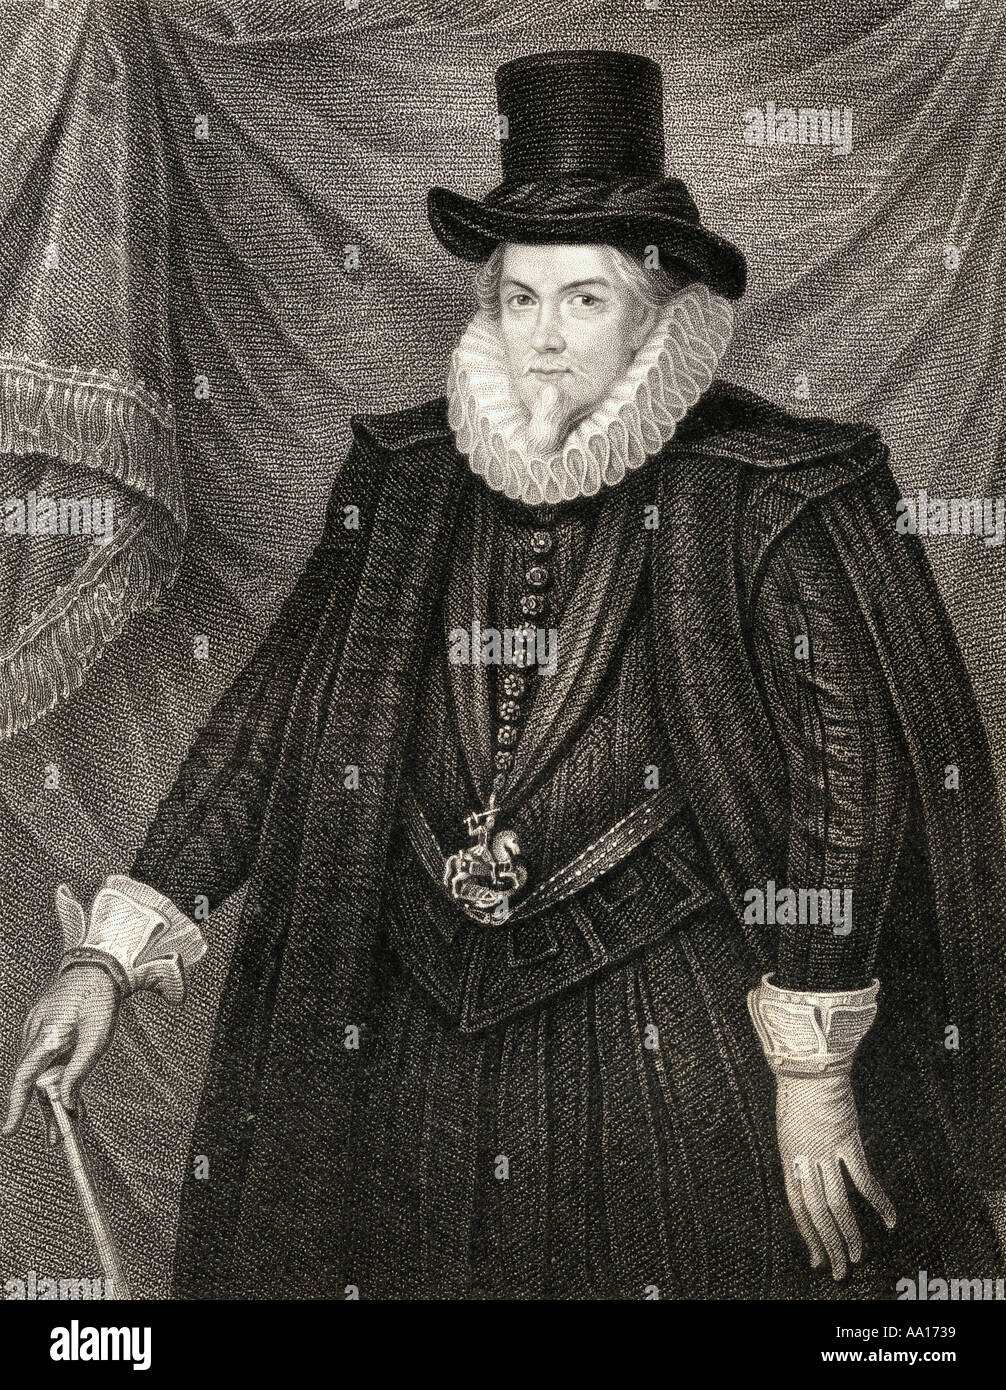 Thomas Cecil, 1st Earl of Exeter, 1542 – 1623, aka Lord Burghley. English politician, courtier and soldier. Stock Photo